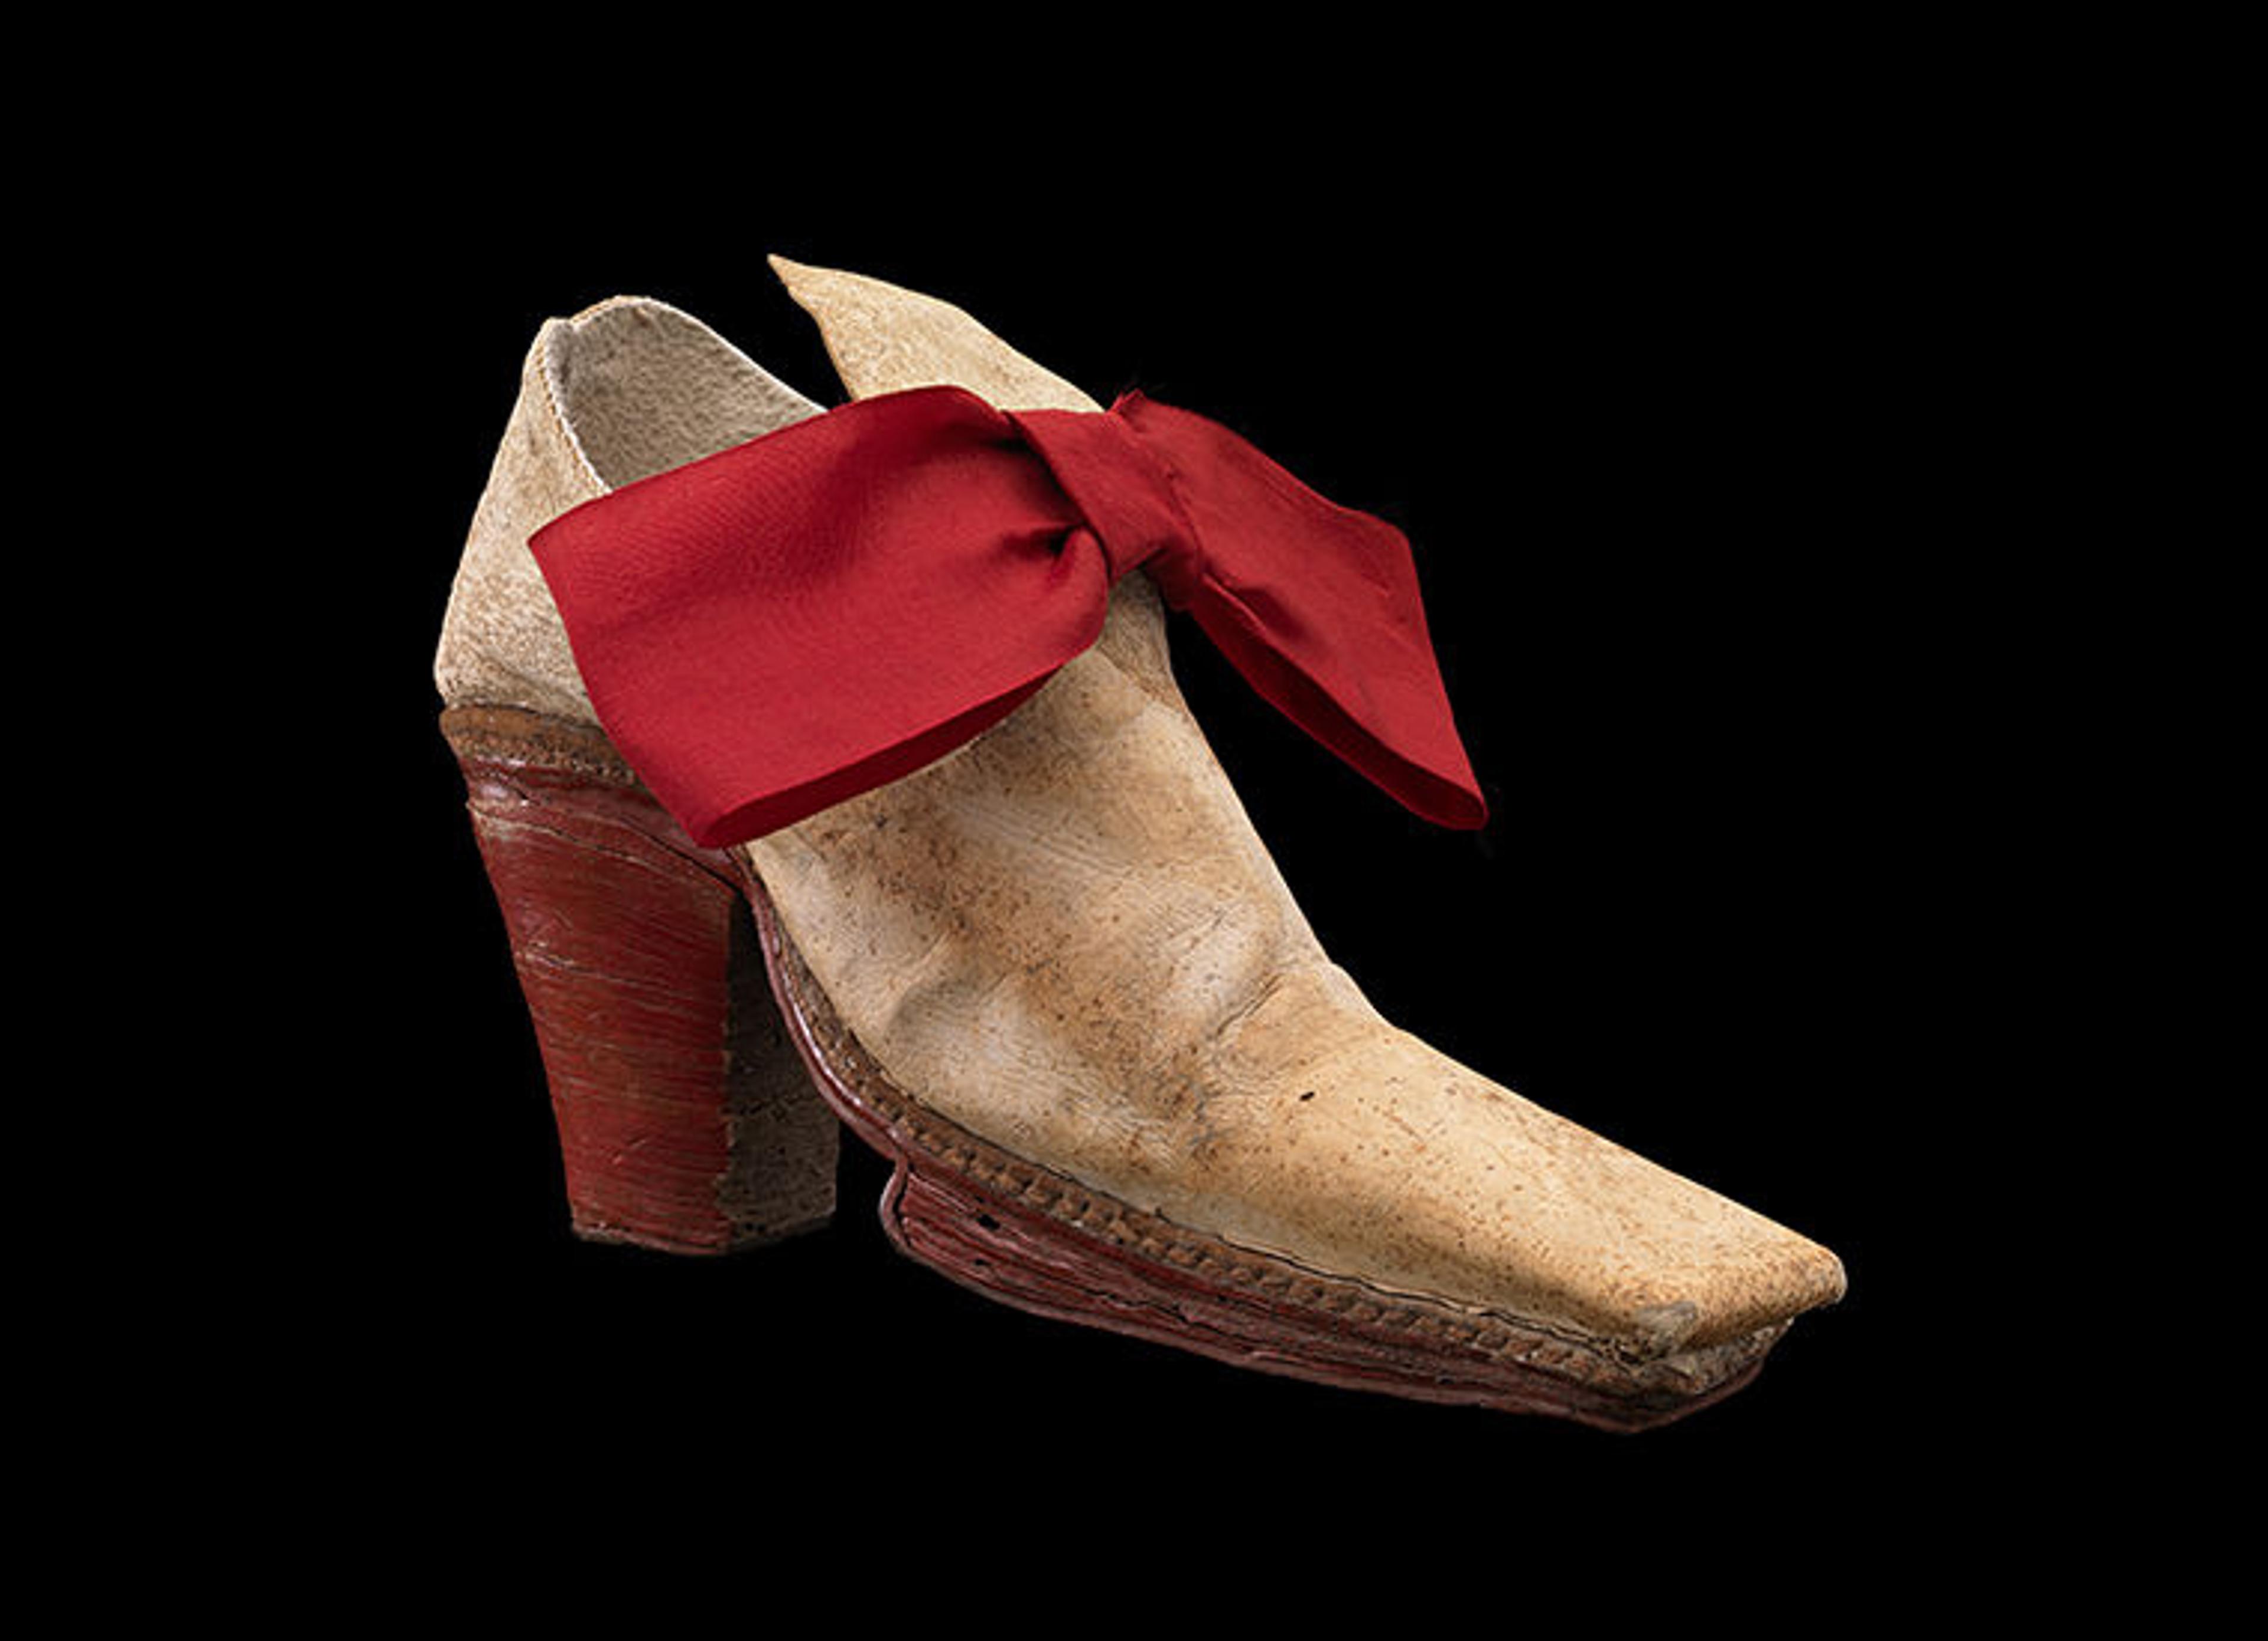 The Monsieur Shoe with red heel and red bow.